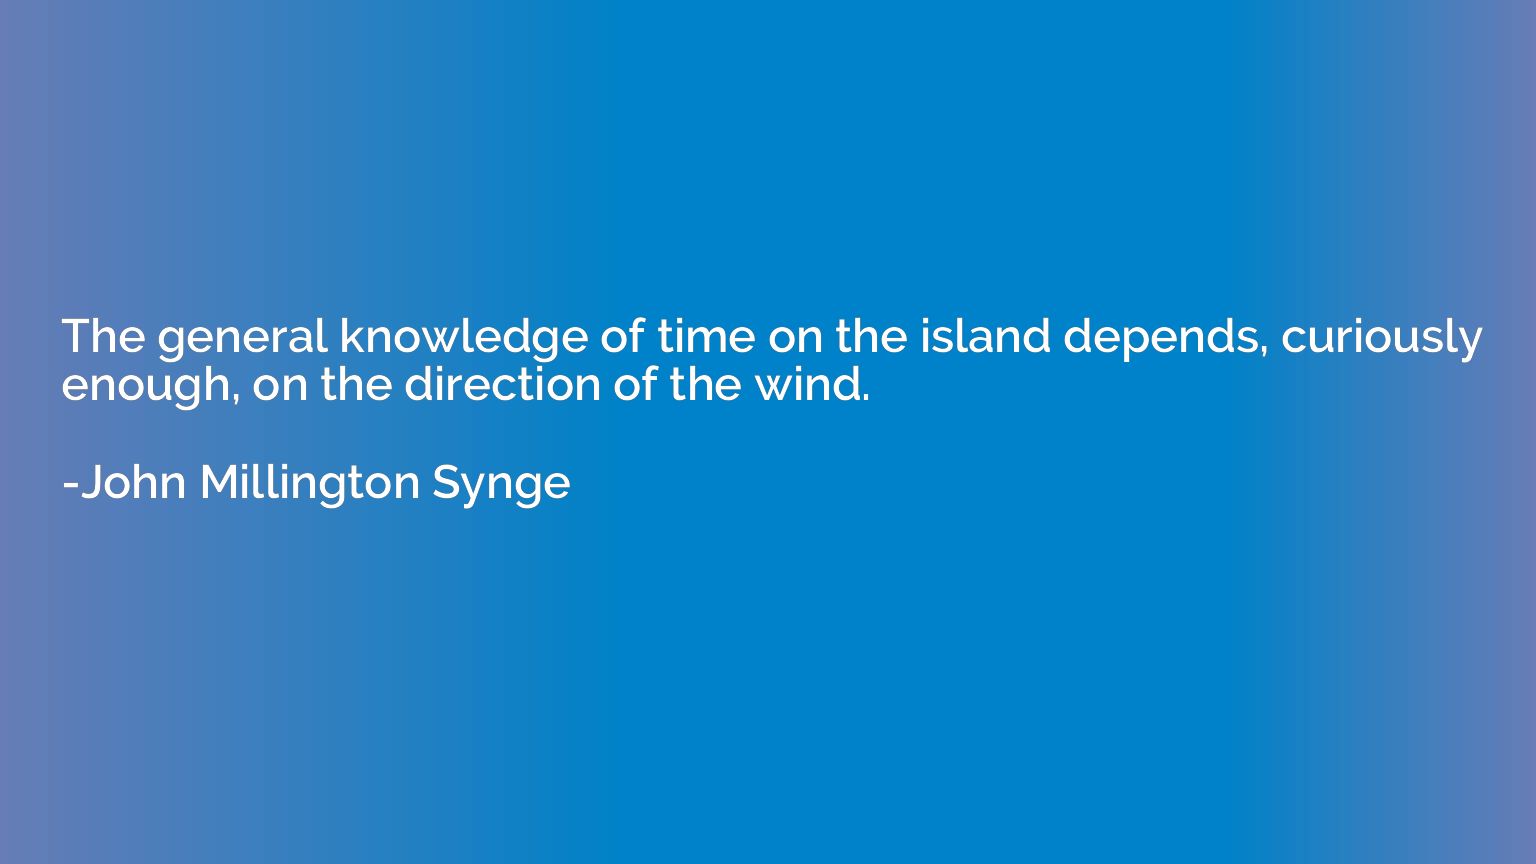 The general knowledge of time on the island depends, curious